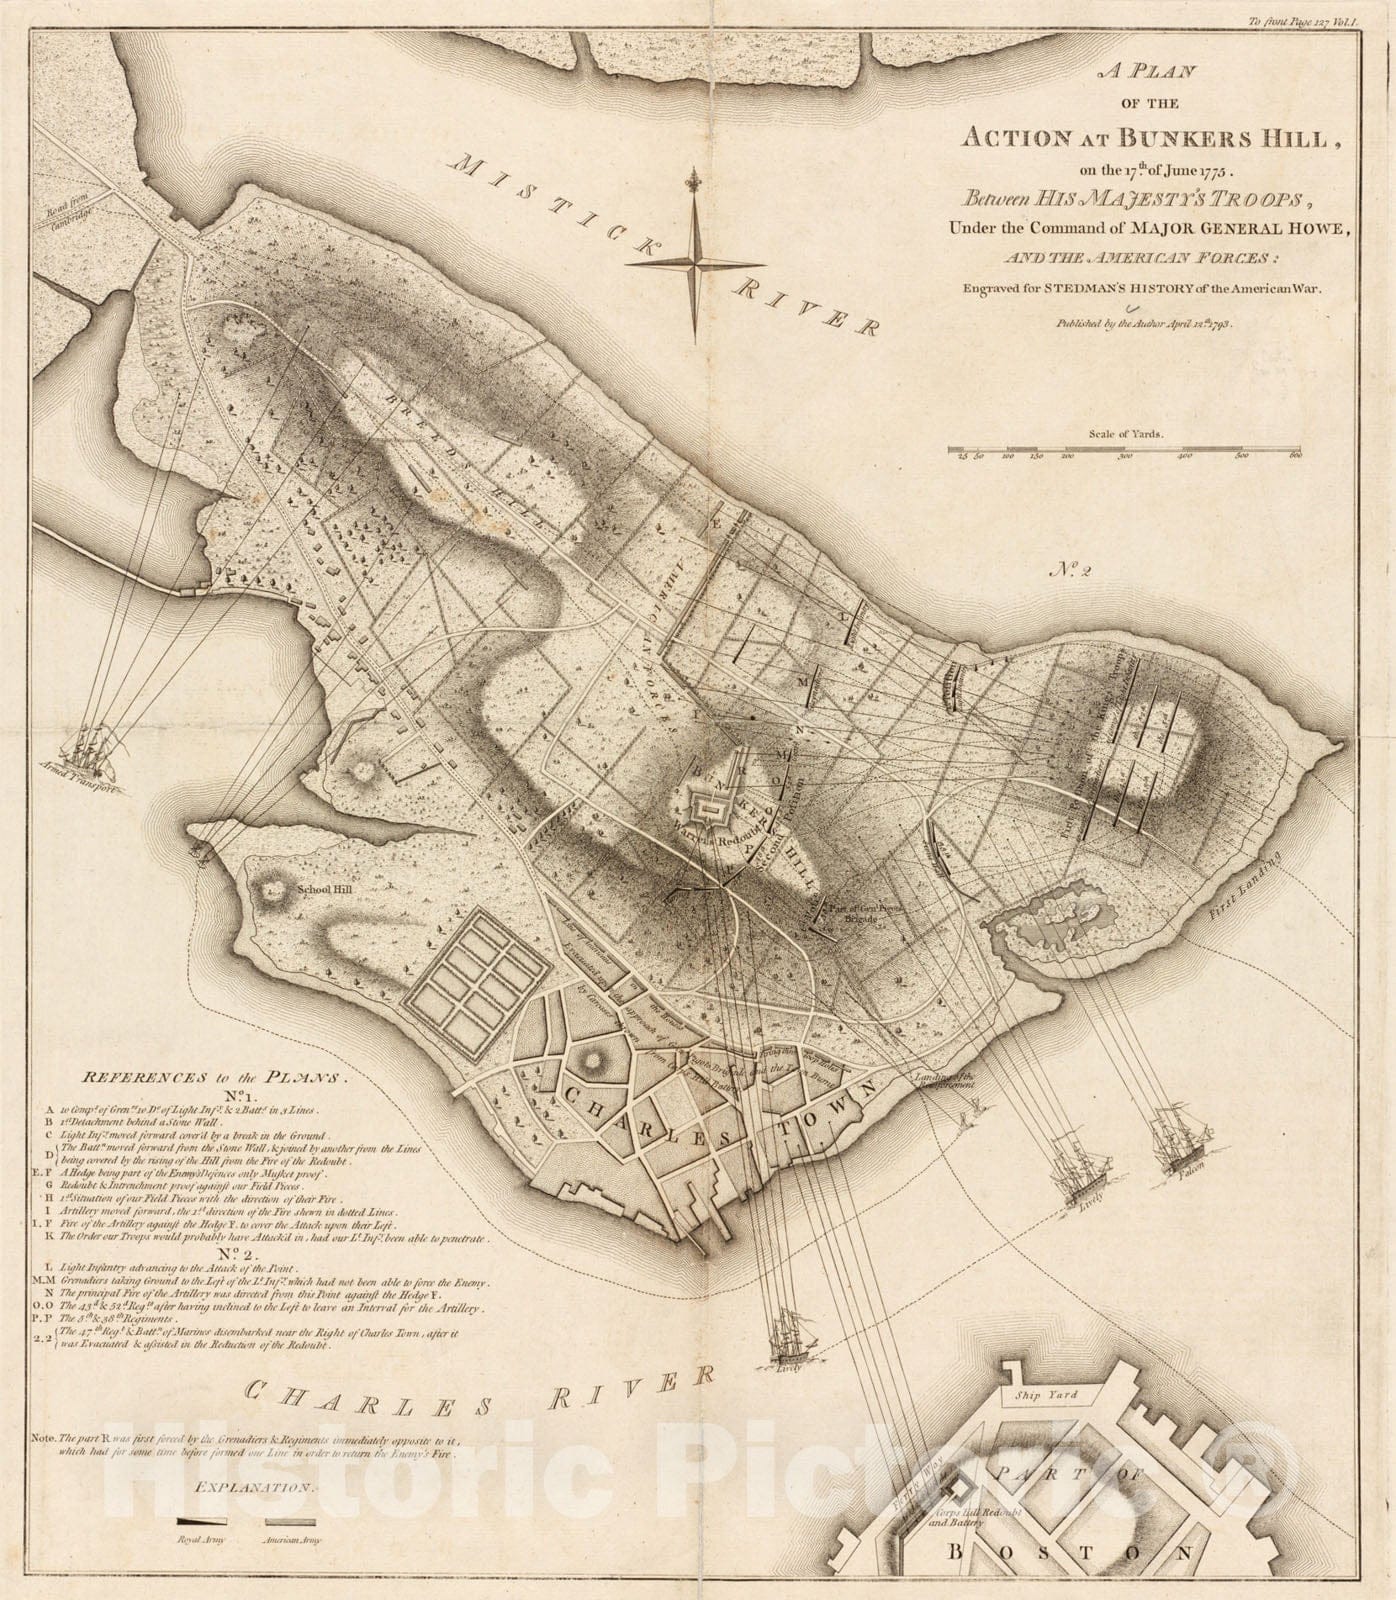 Historical Map, 1793 A Plan of the action at Bunkers Hill on the 17th of June 1775 between His Majesty's troops, under the command of Major General Howe, and the American forces, Vintage Wall Art